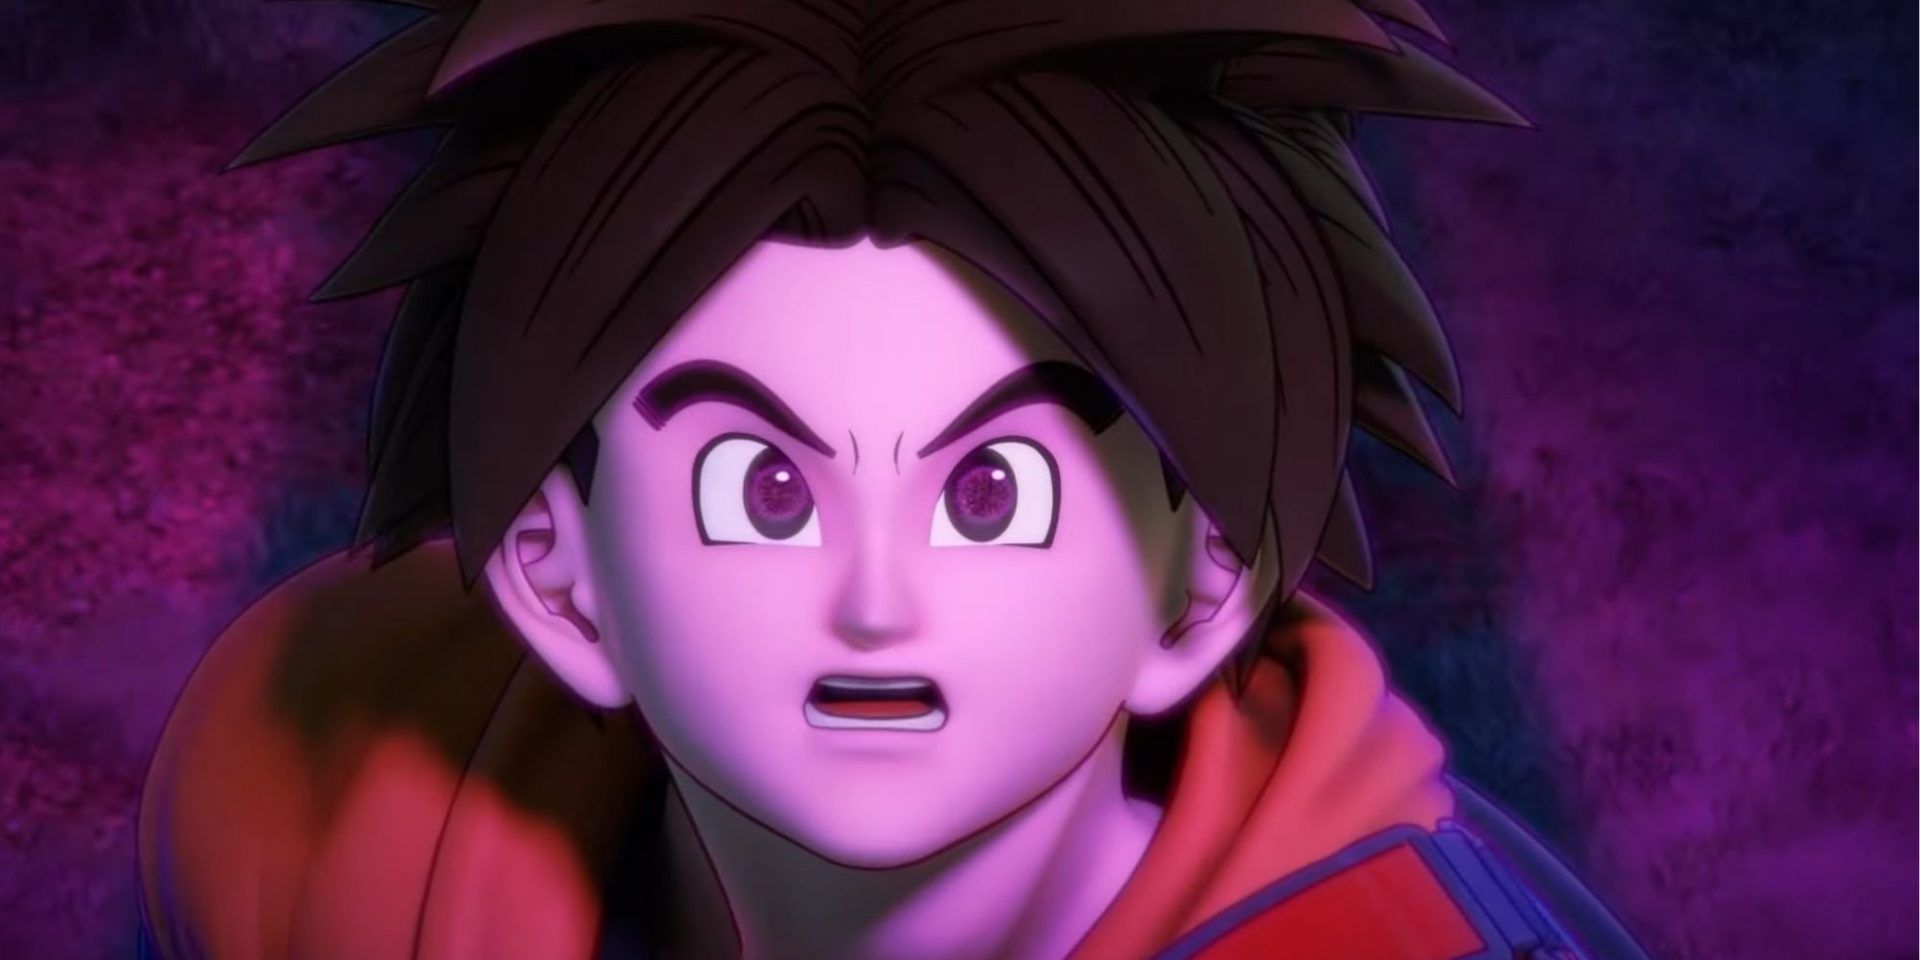 Dragon Ball: The Breakers - Official Announcement Trailer 